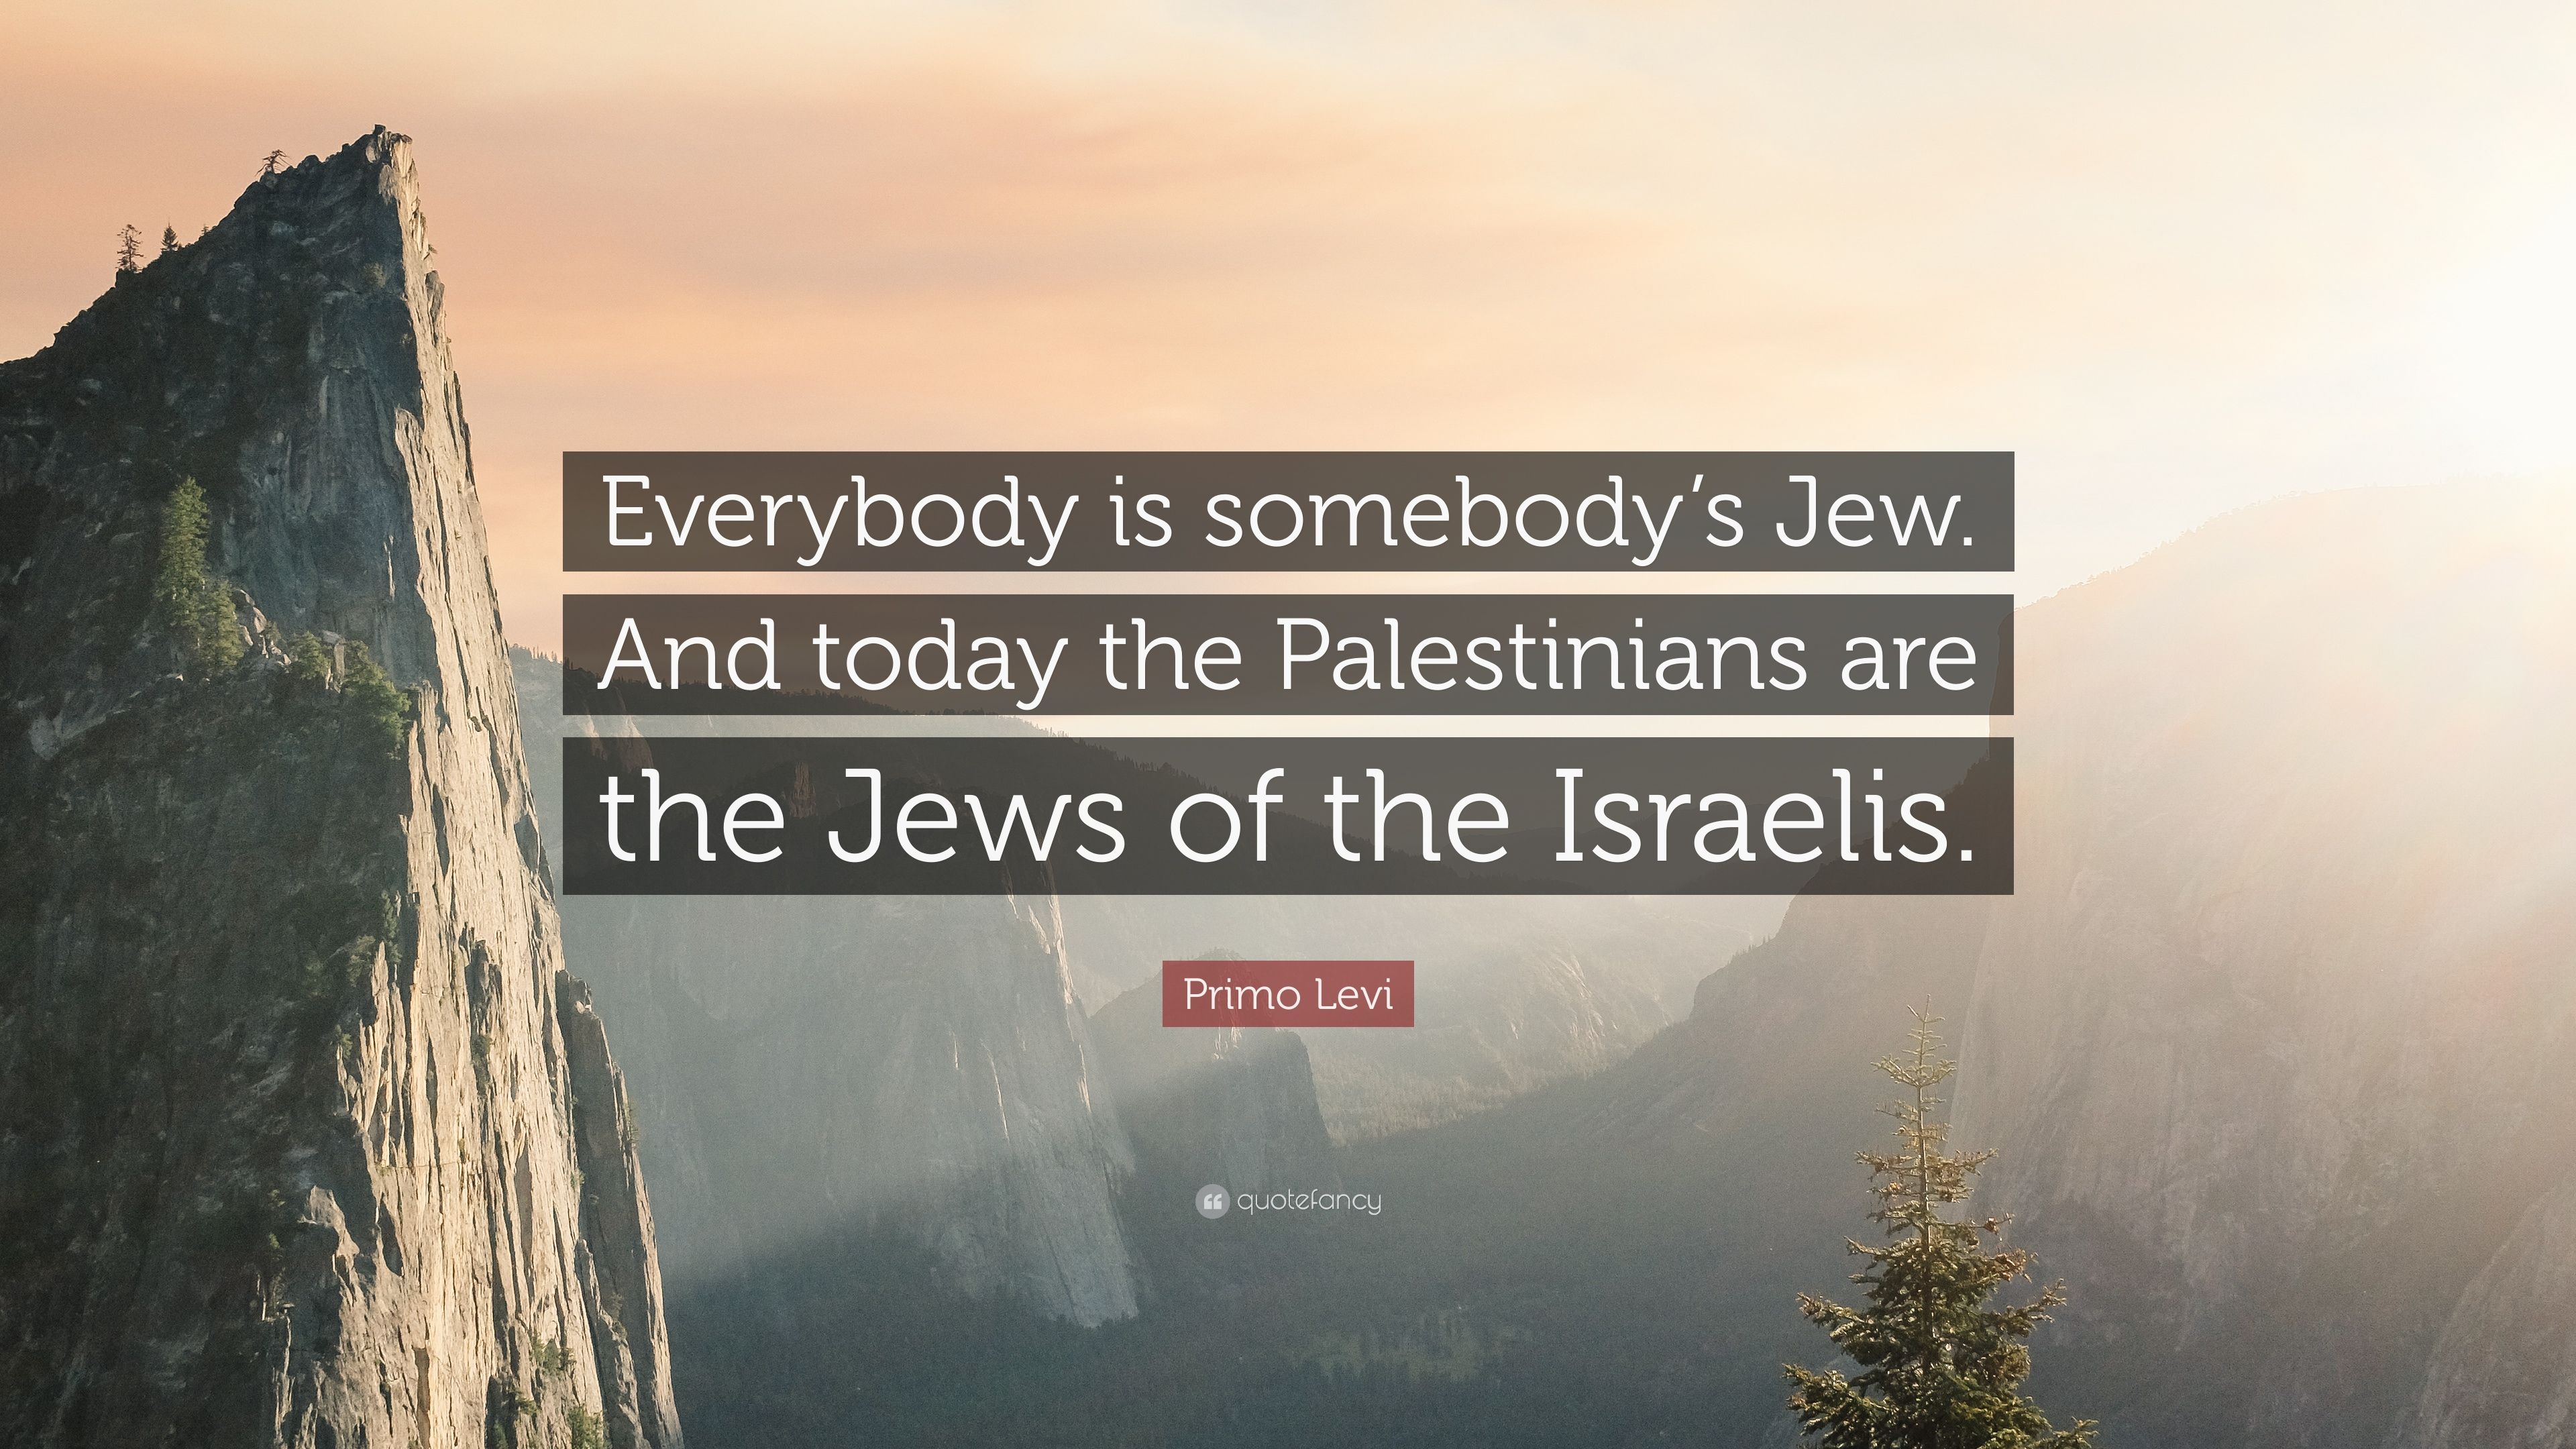 Primo Levi Quote: “Everybody is somebody's Jew. And today